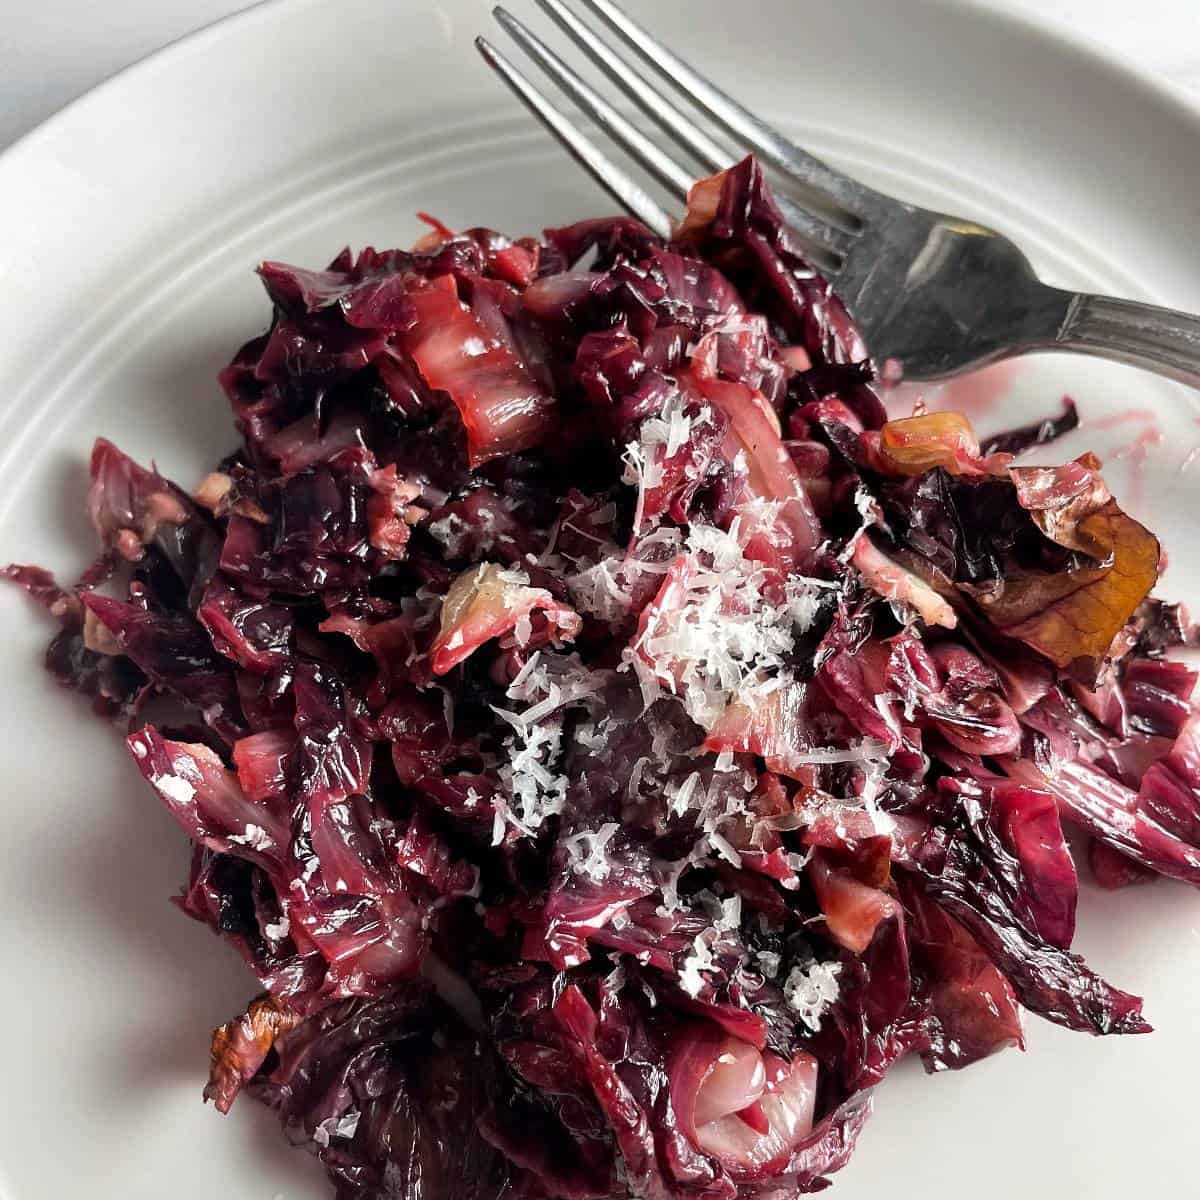 Sautéed radicchio on a plate topped with grated Parmesan cheese.